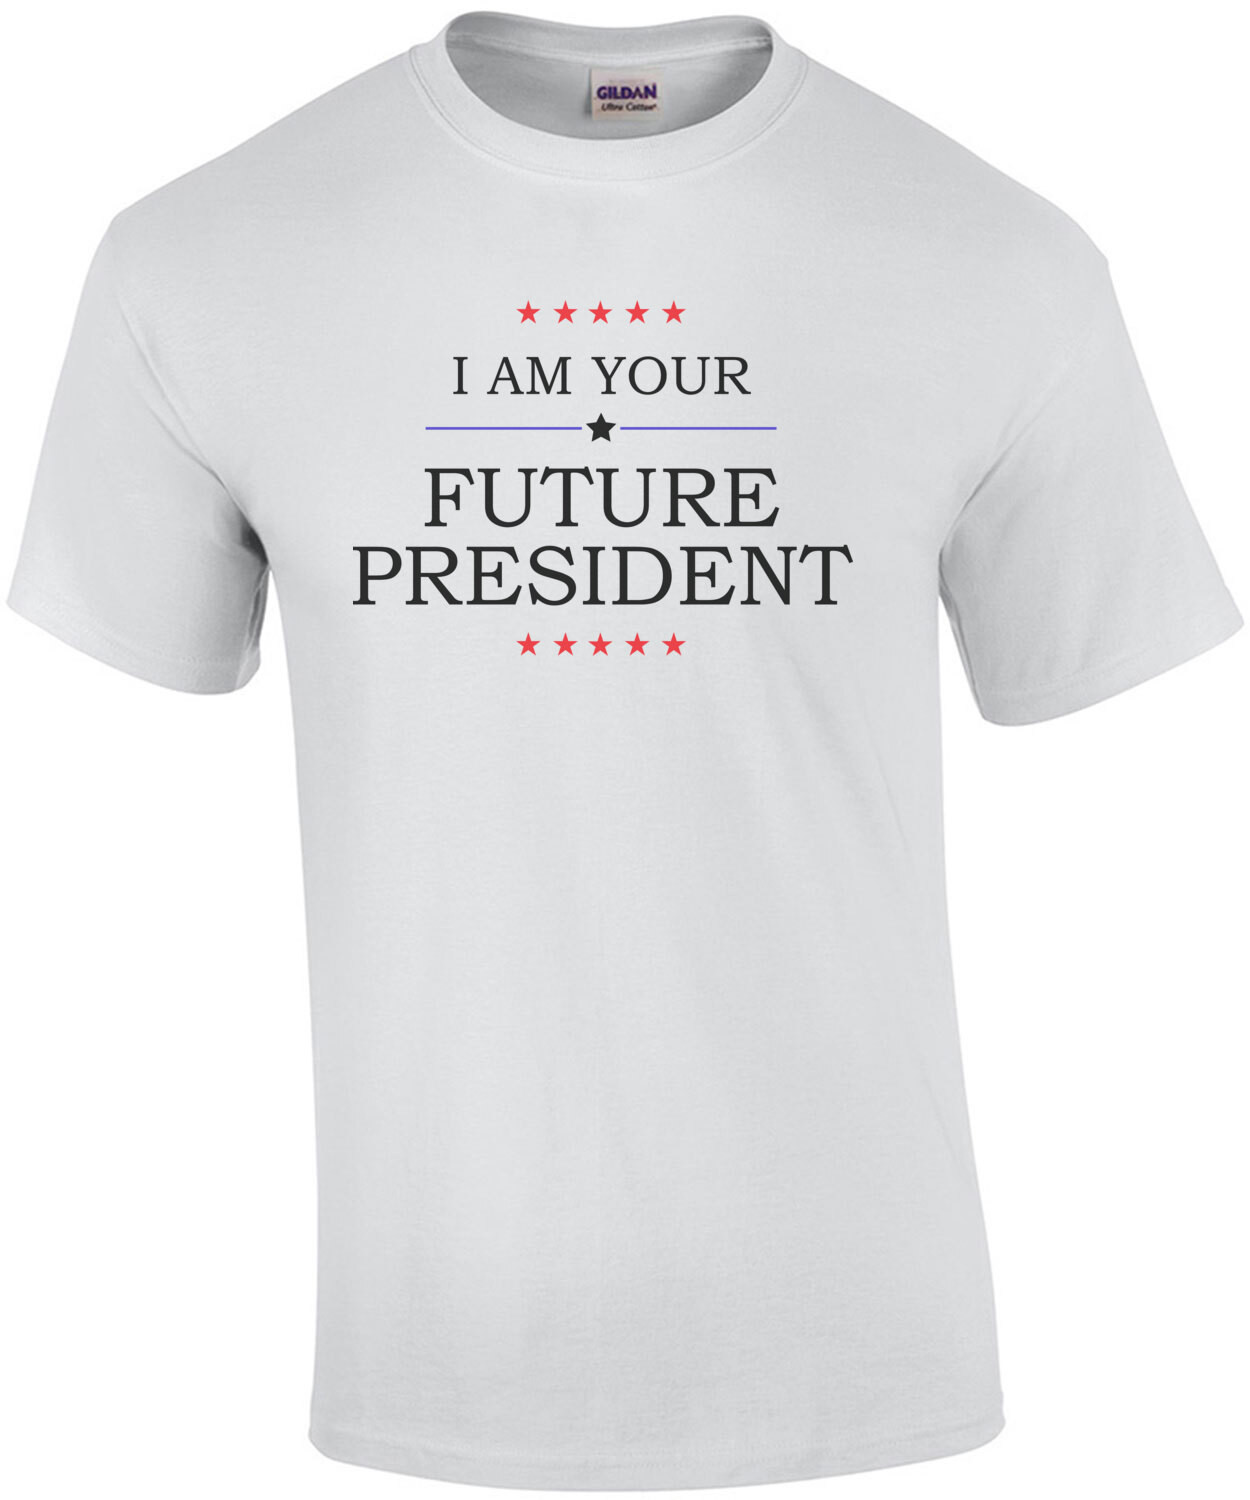 I am your future president - funny sarcastic t-shirt